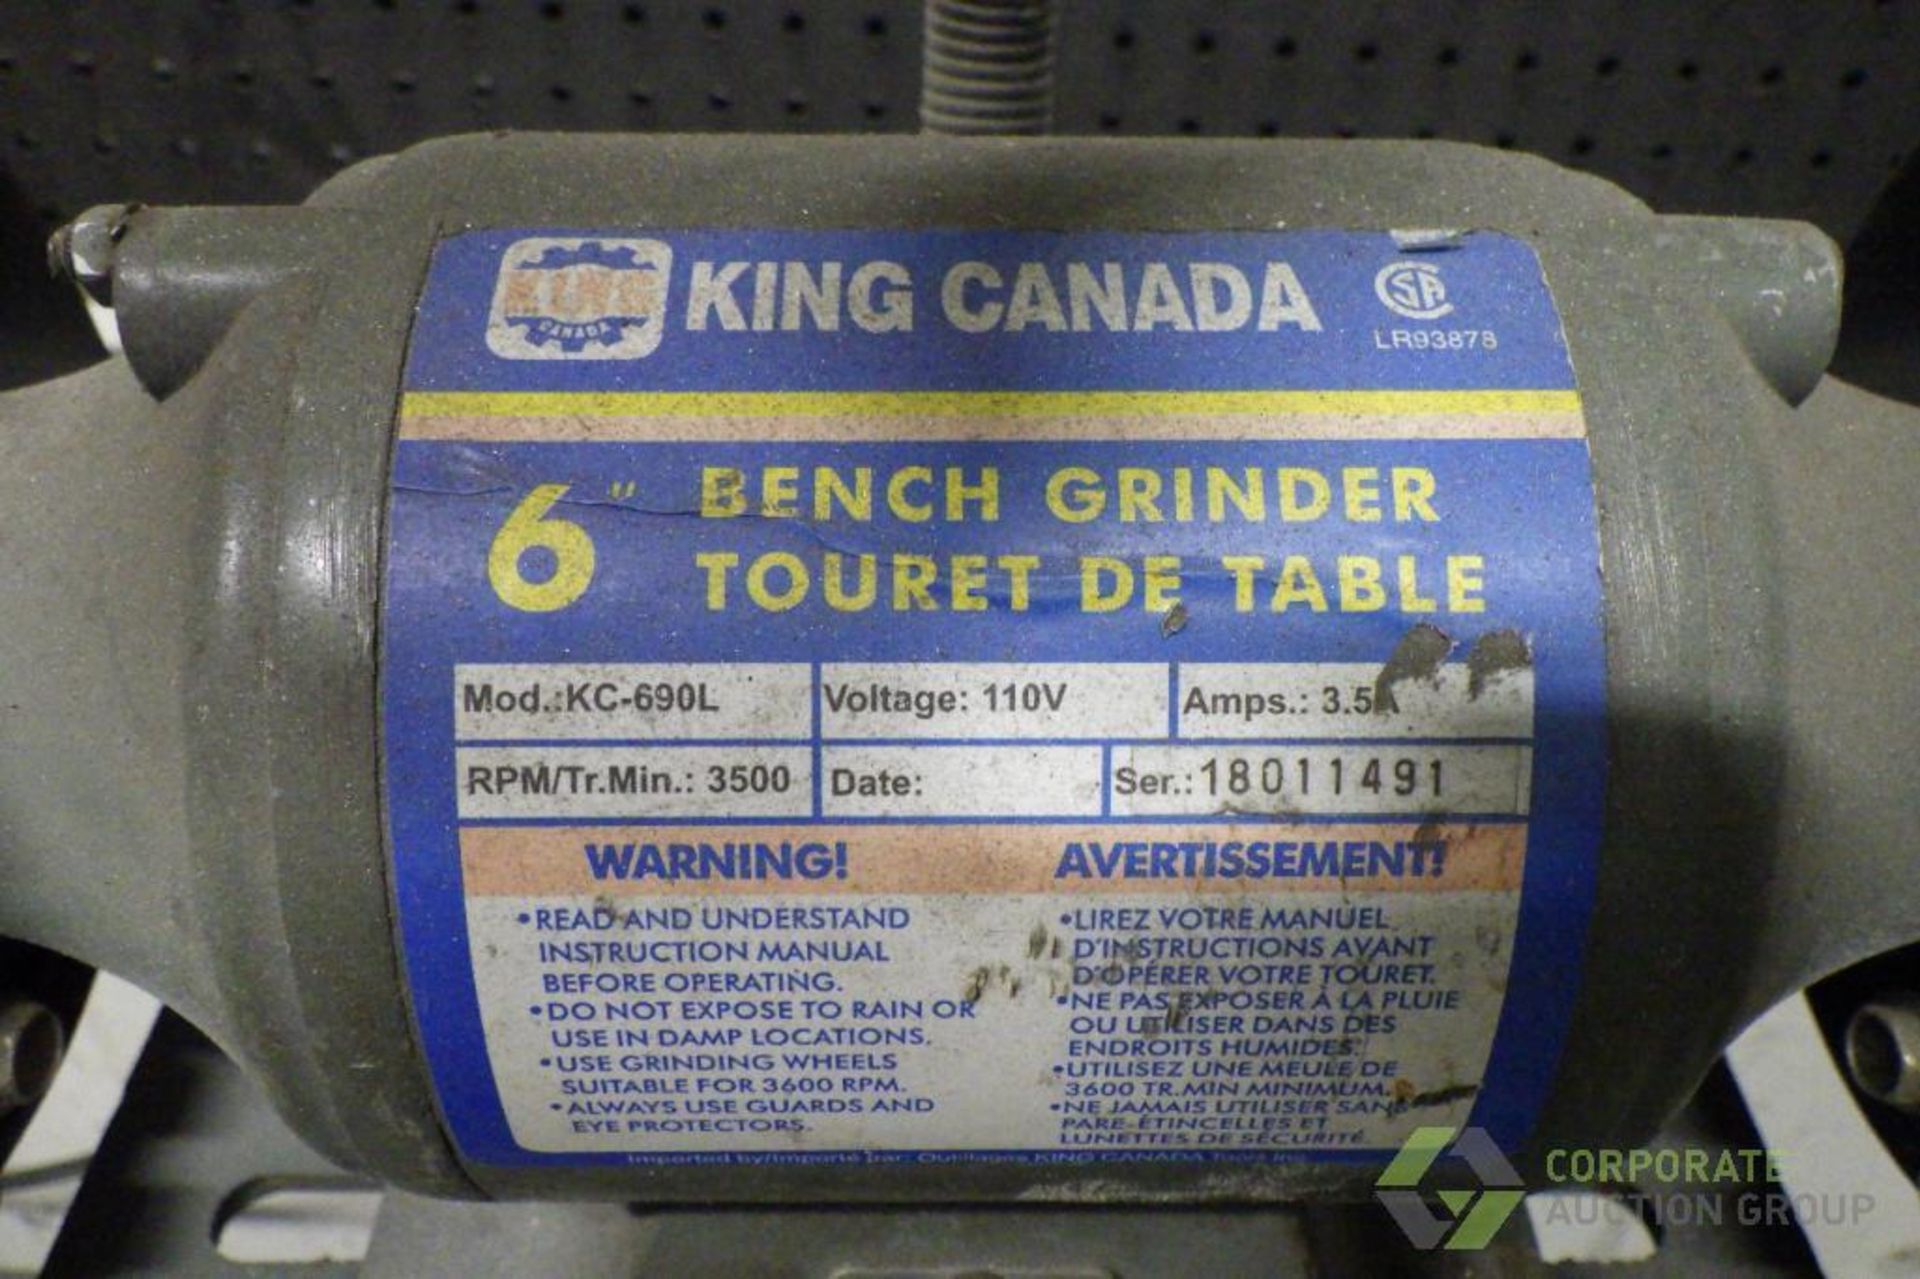 King Canada 6 in. bench grinder - Image 4 of 5